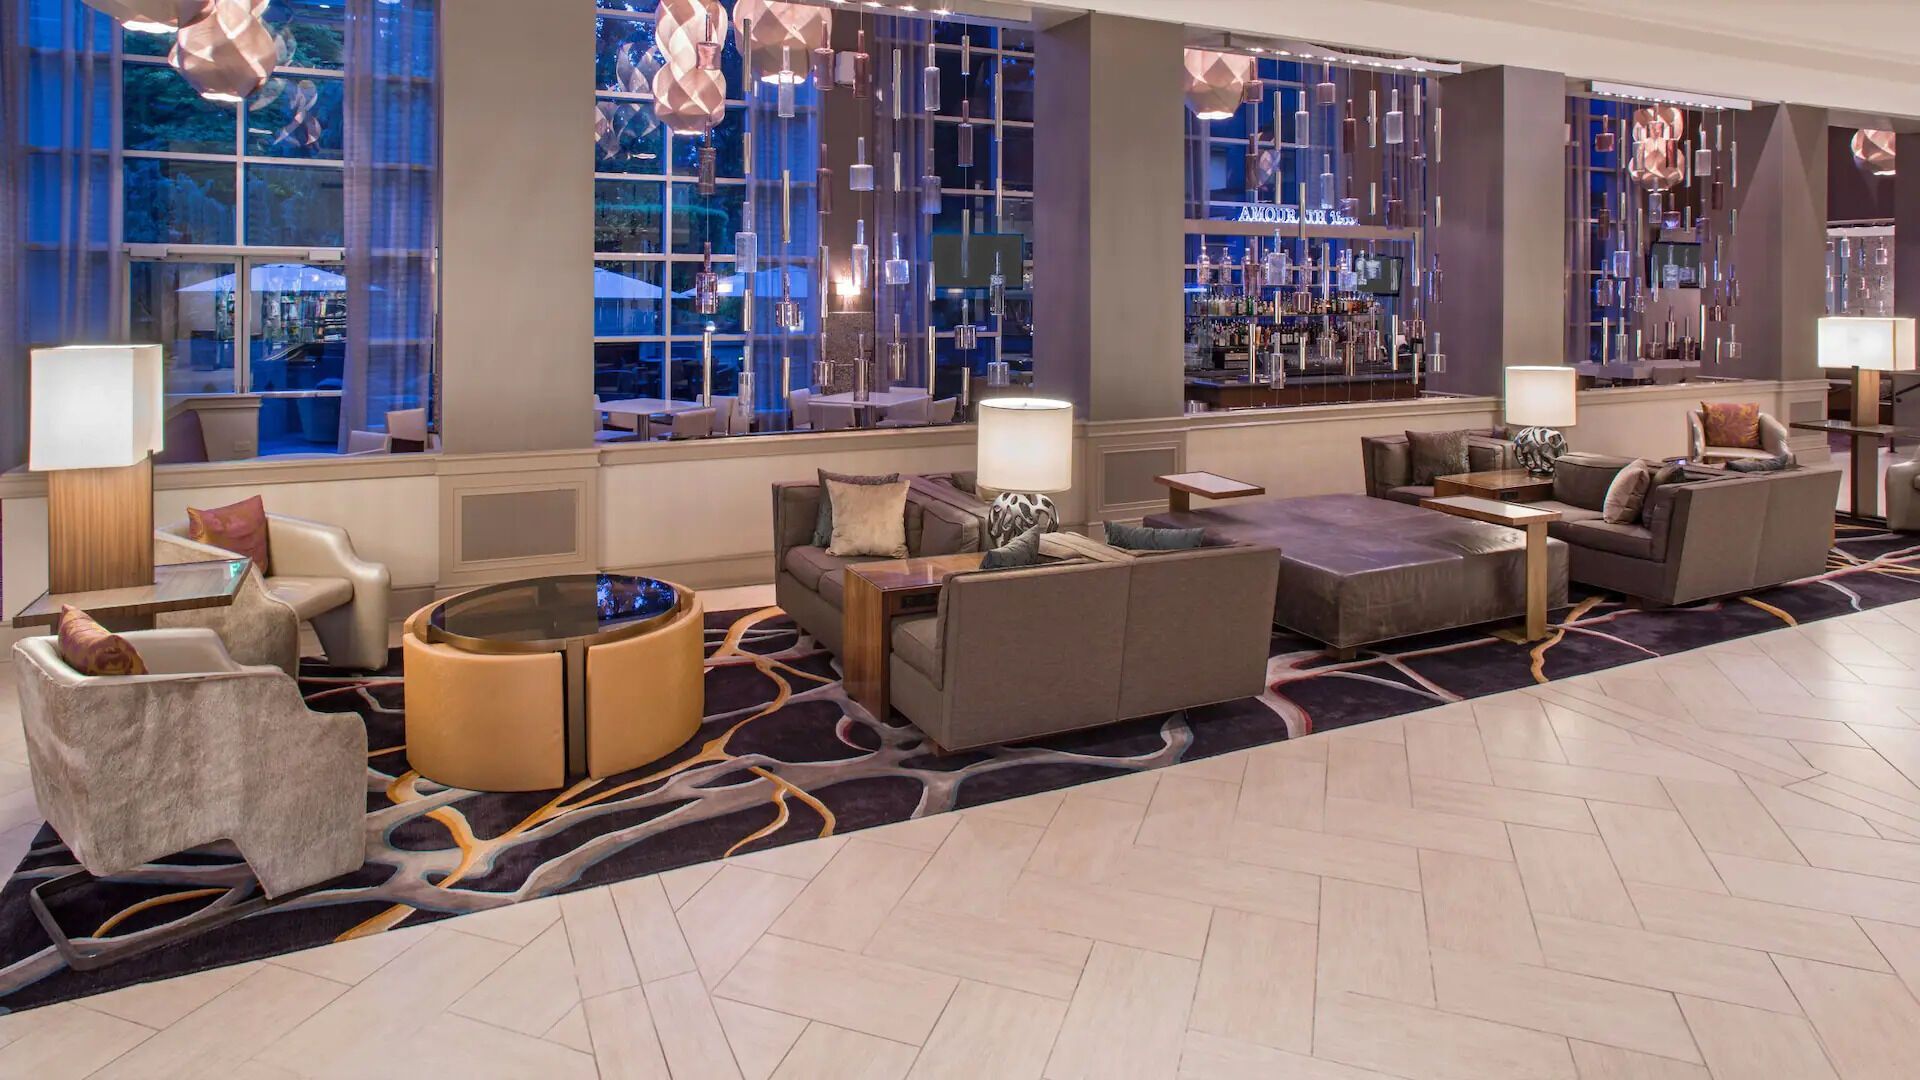 Top 8 hotels in Sacramento, CA. A high end stopover for your varied purposes